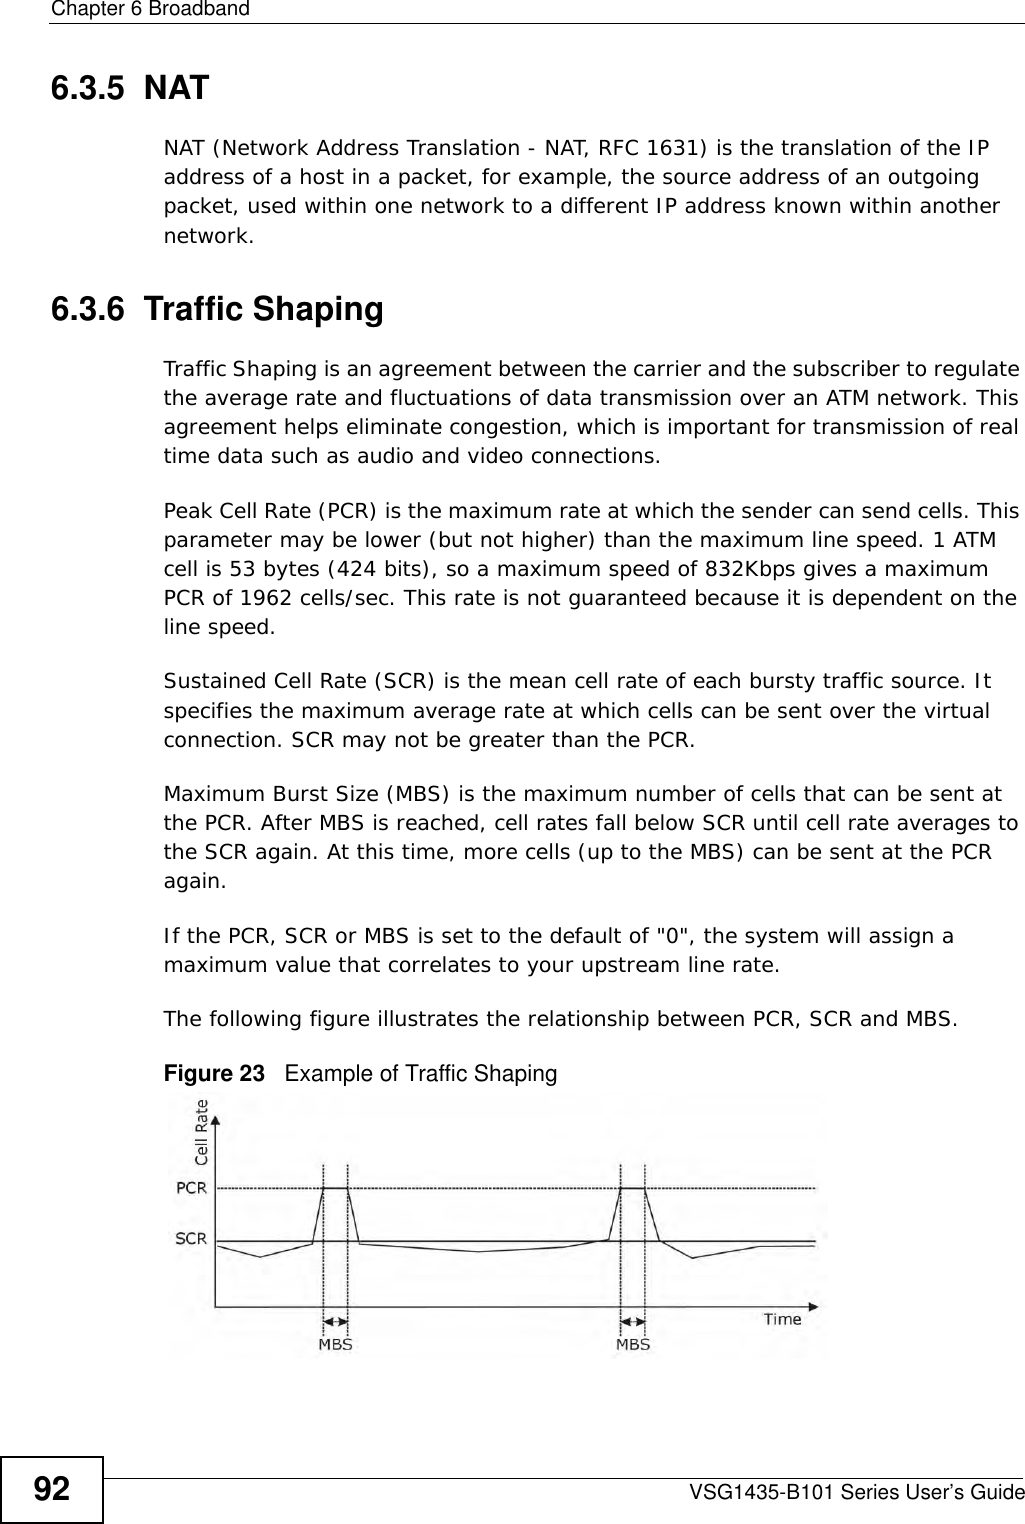 Chapter 6 BroadbandVSG1435-B101 Series User’s Guide926.3.5  NATNAT (Network Address Translation - NAT, RFC 1631) is the translation of the IP address of a host in a packet, for example, the source address of an outgoing packet, used within one network to a different IP address known within another network.6.3.6  Traffic ShapingTraffic Shaping is an agreement between the carrier and the subscriber to regulate the average rate and fluctuations of data transmission over an ATM network. This agreement helps eliminate congestion, which is important for transmission of real time data such as audio and video connections.Peak Cell Rate (PCR) is the maximum rate at which the sender can send cells. This parameter may be lower (but not higher) than the maximum line speed. 1 ATM cell is 53 bytes (424 bits), so a maximum speed of 832Kbps gives a maximum PCR of 1962 cells/sec. This rate is not guaranteed because it is dependent on the line speed.Sustained Cell Rate (SCR) is the mean cell rate of each bursty traffic source. It specifies the maximum average rate at which cells can be sent over the virtual connection. SCR may not be greater than the PCR.Maximum Burst Size (MBS) is the maximum number of cells that can be sent at the PCR. After MBS is reached, cell rates fall below SCR until cell rate averages to the SCR again. At this time, more cells (up to the MBS) can be sent at the PCR again.If the PCR, SCR or MBS is set to the default of &quot;0&quot;, the system will assign a maximum value that correlates to your upstream line rate. The following figure illustrates the relationship between PCR, SCR and MBS. Figure 23   Example of Traffic Shaping